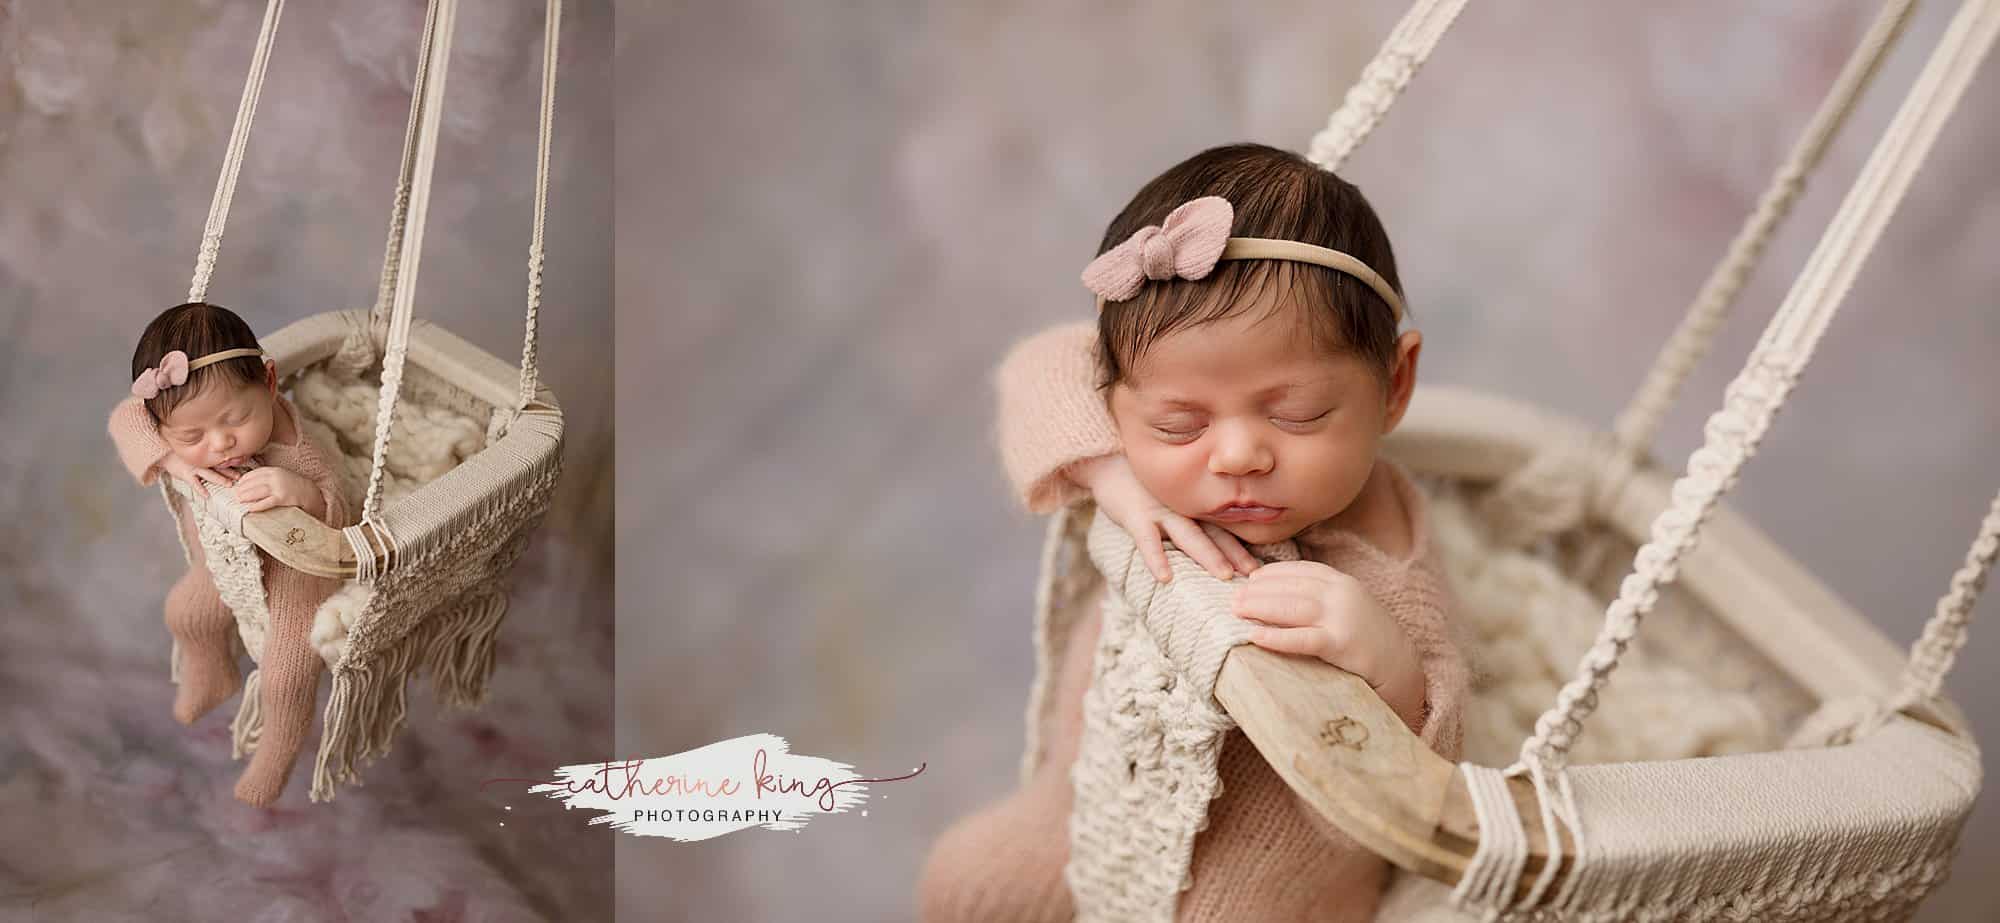 1 month old baby girl from Port Chester, NY | Gianna